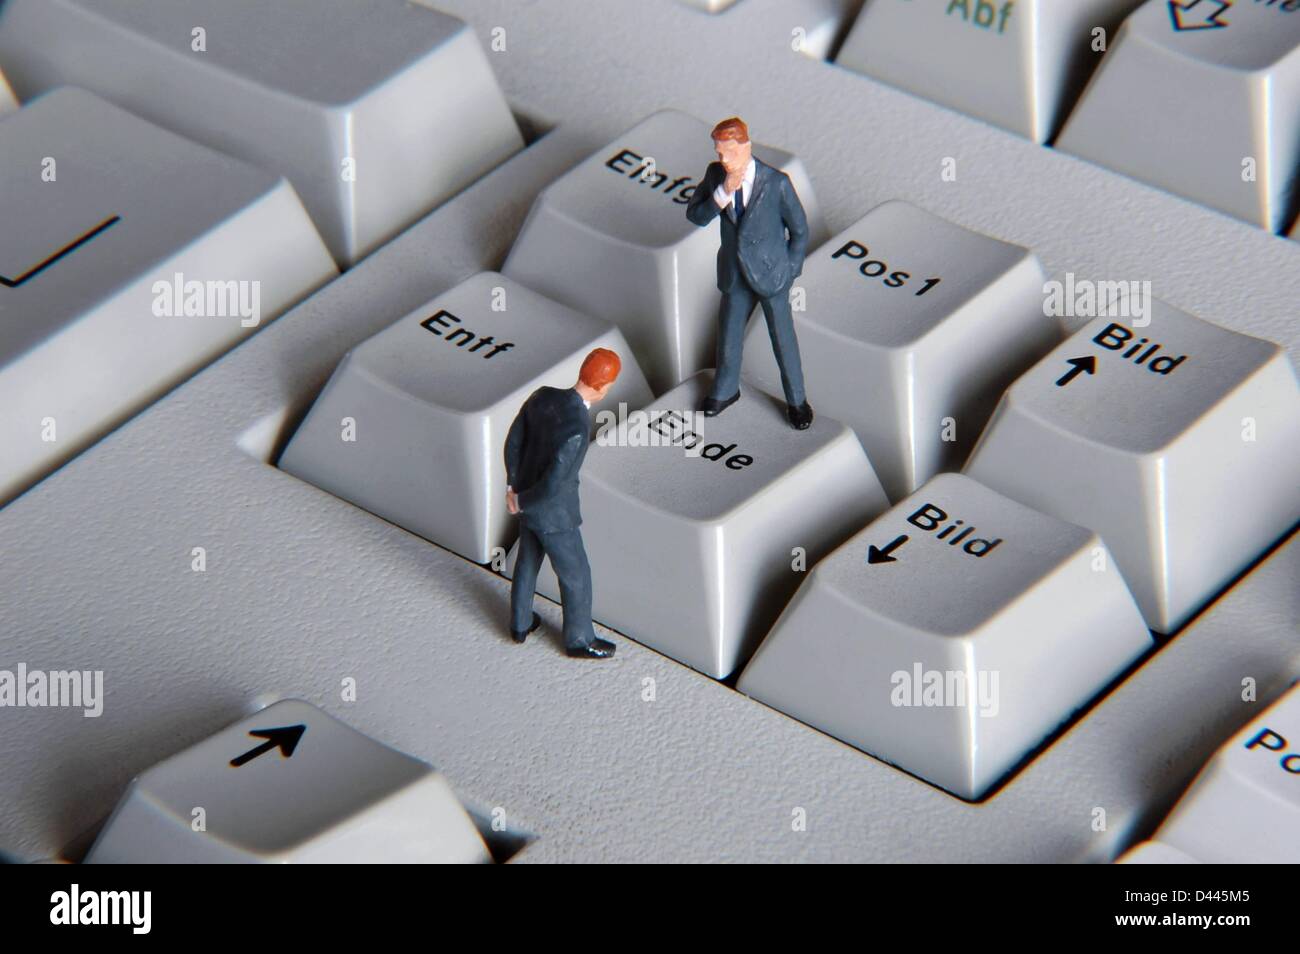 Illustrations - Two miniature manager figures are pictured in front of the 'Ende' (End) key of a PC keyboard in Berlin, Germany, 29 December 2007. Fotoarchiv für ZeitgeschichteS.Steinach Stock Photo